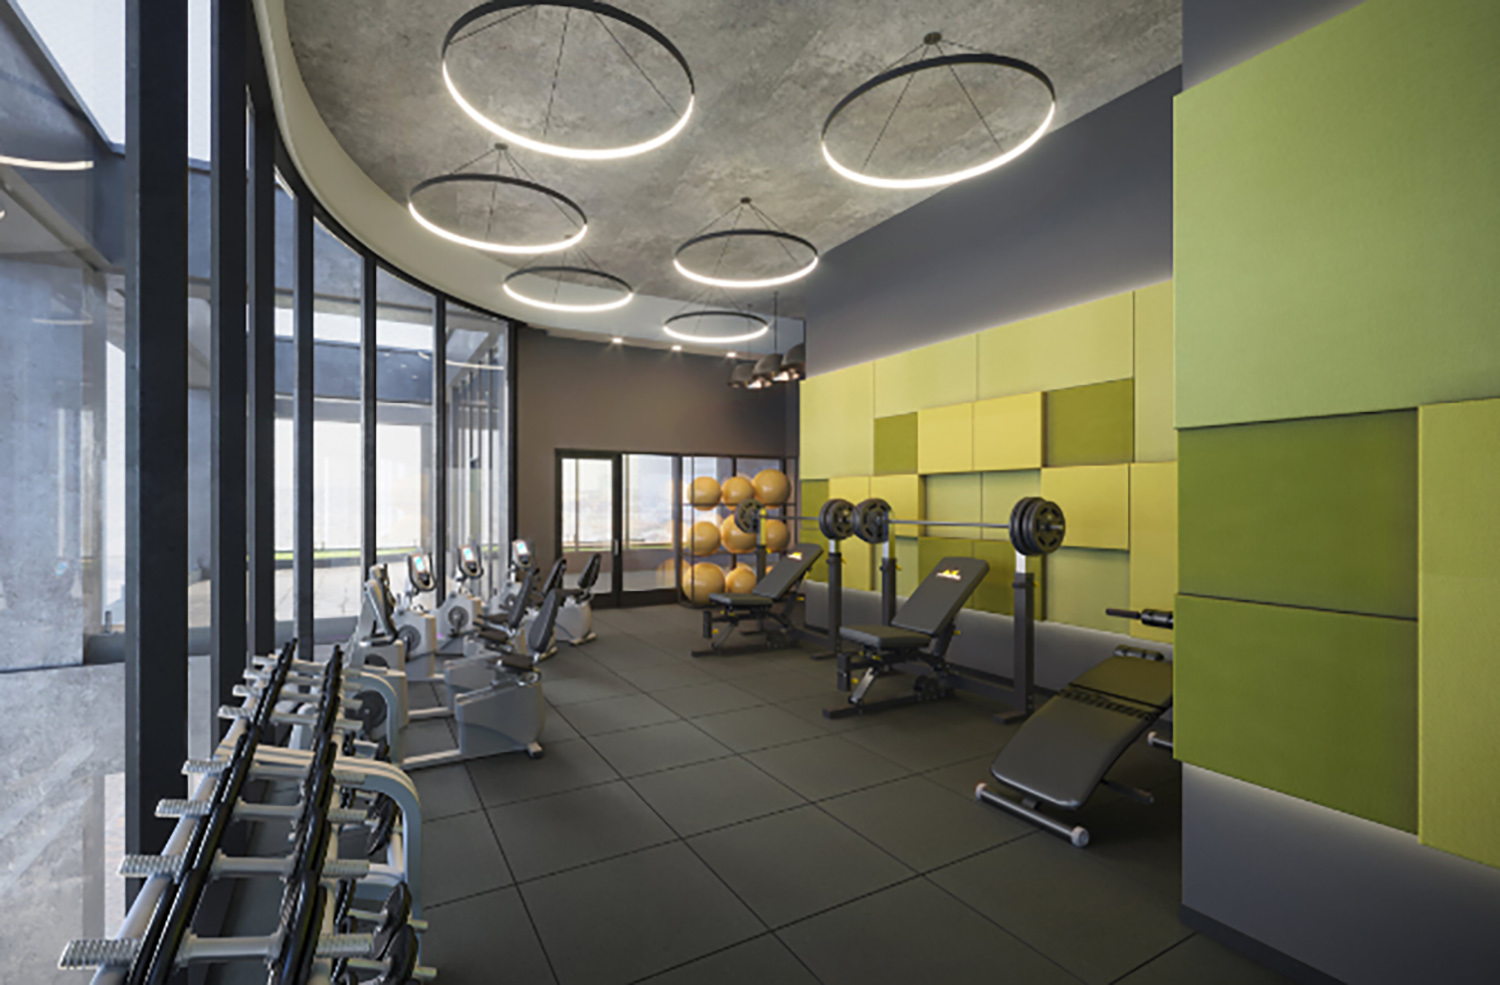 Fitness Center at 311 W Huron Street. Rendering by NORR Architects